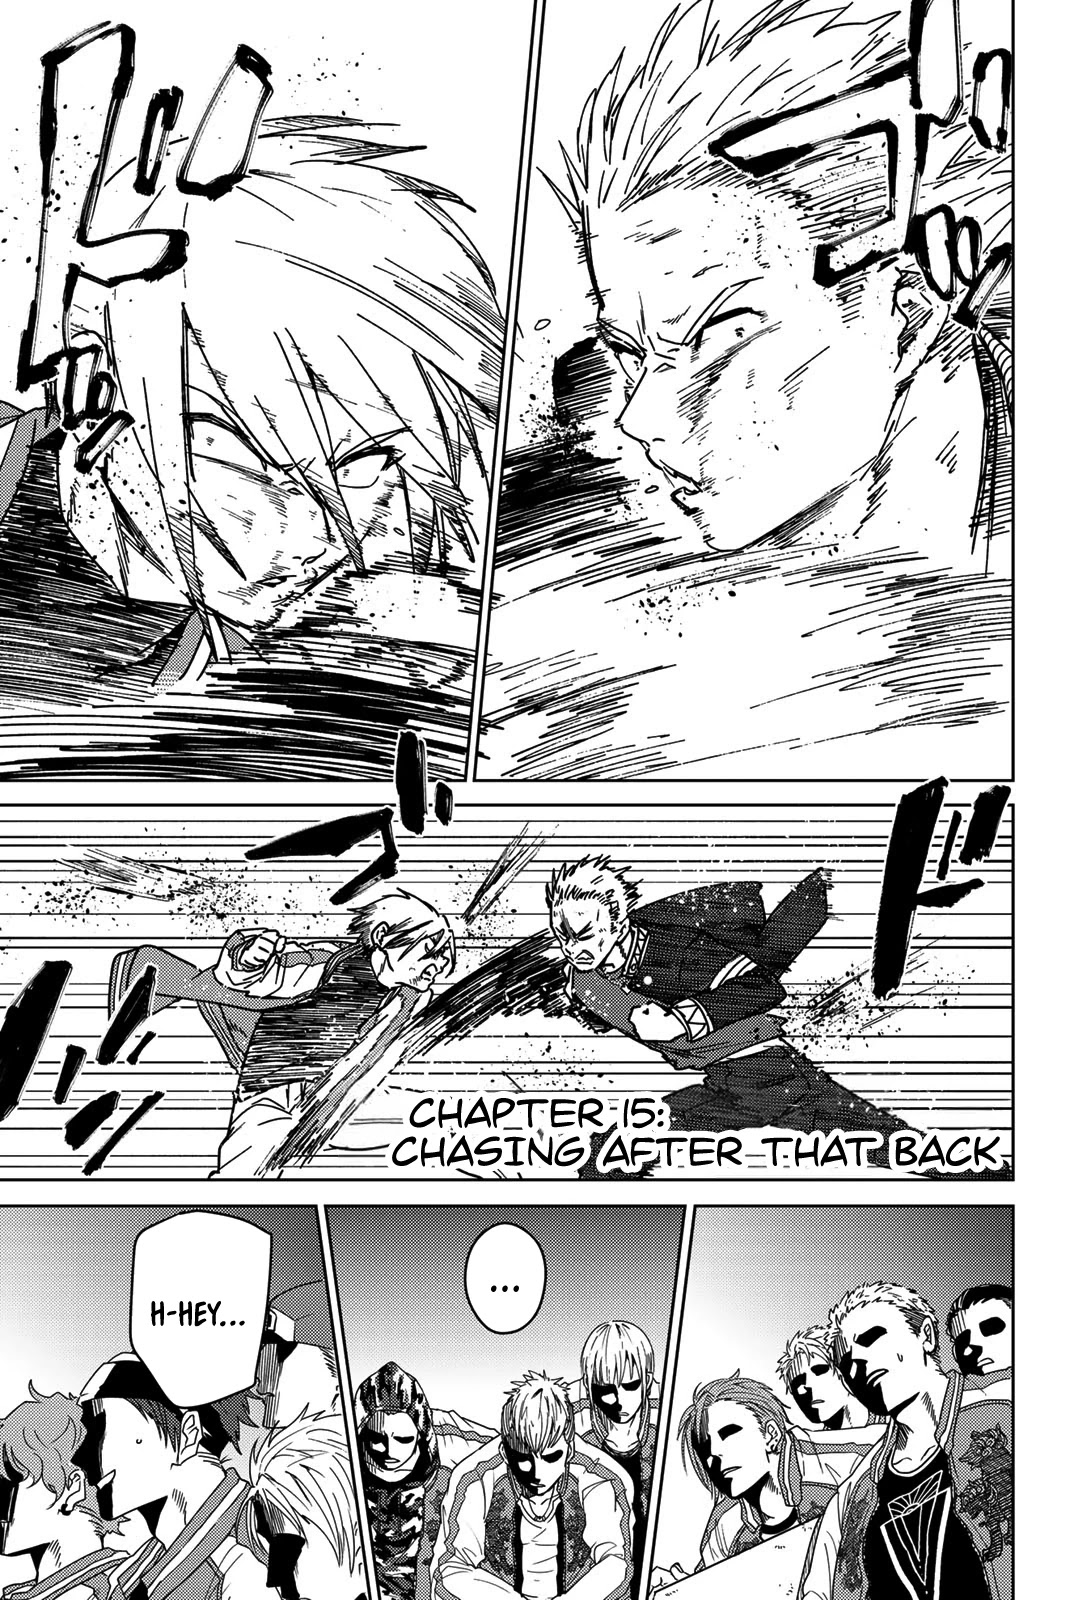 Wind Breaker (Nii Satoru) Chapter 15: Chasing After That Back - Picture 1